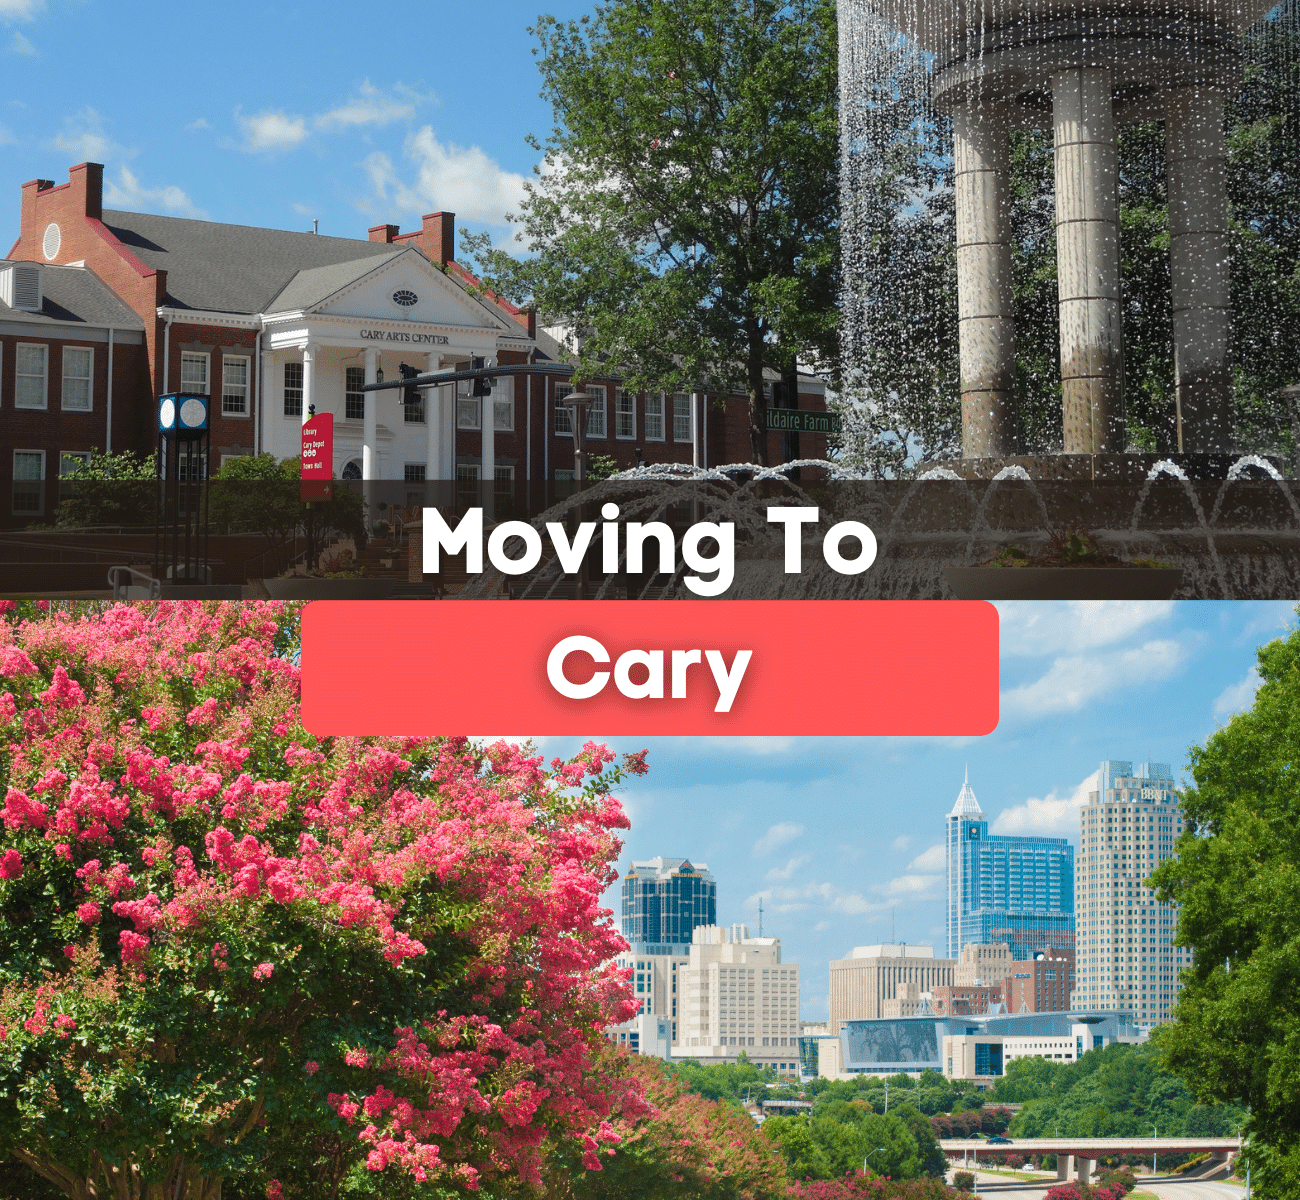 Moving to Cary, NC - What is it like living in Cary? Is it a good place to live?